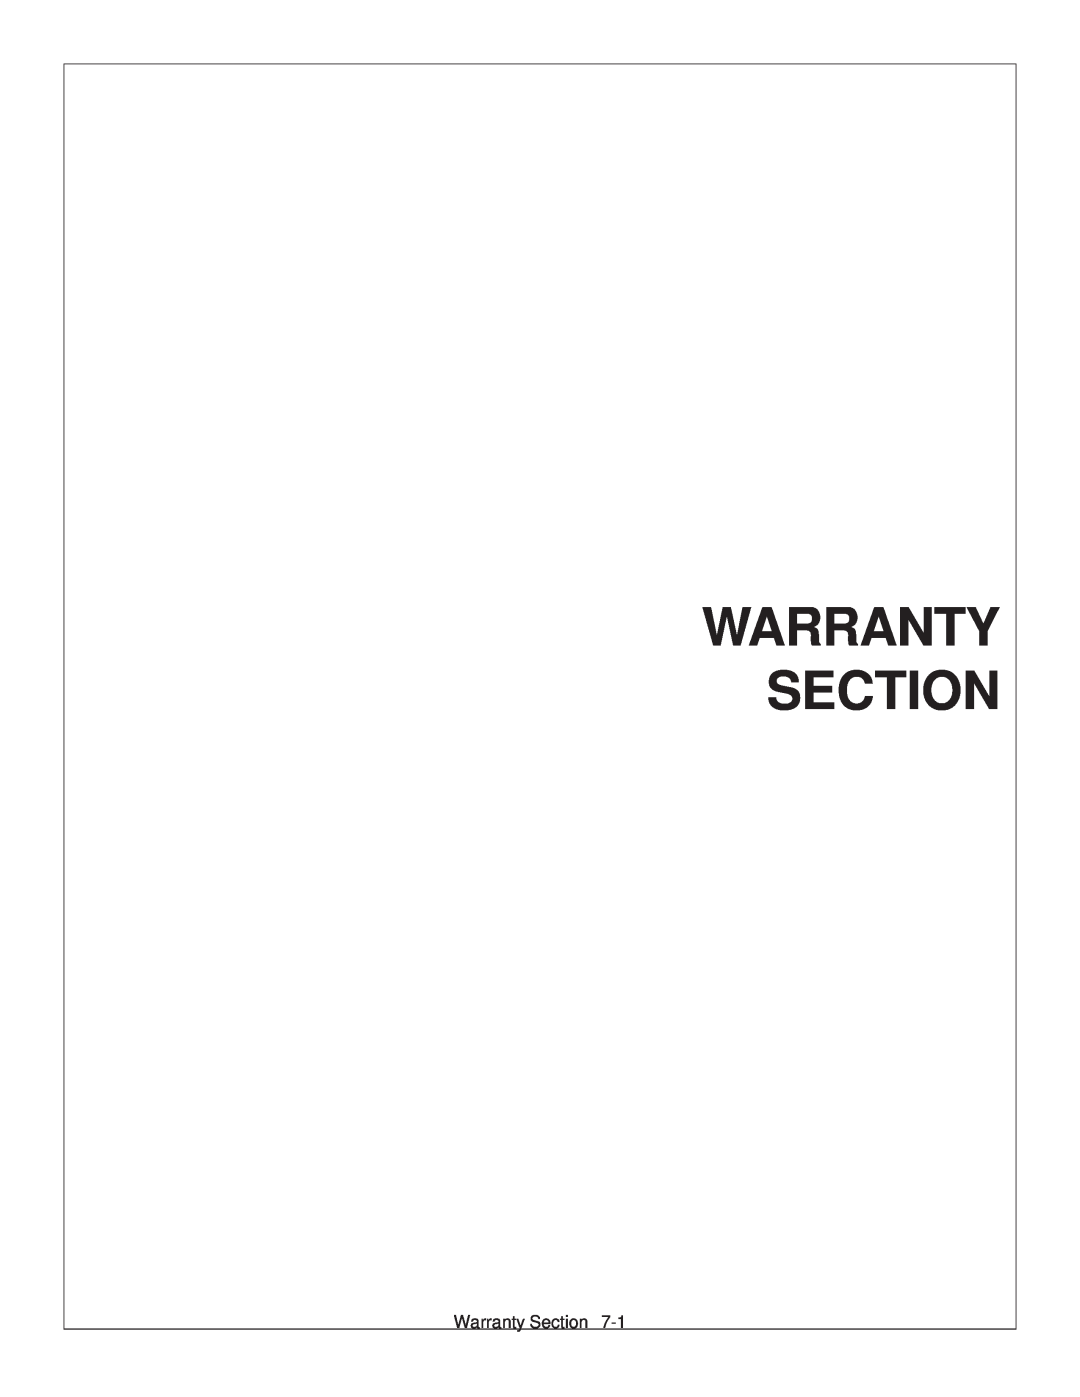 Tiger Products Co., Ltd TS 100A manual Warranty Section 